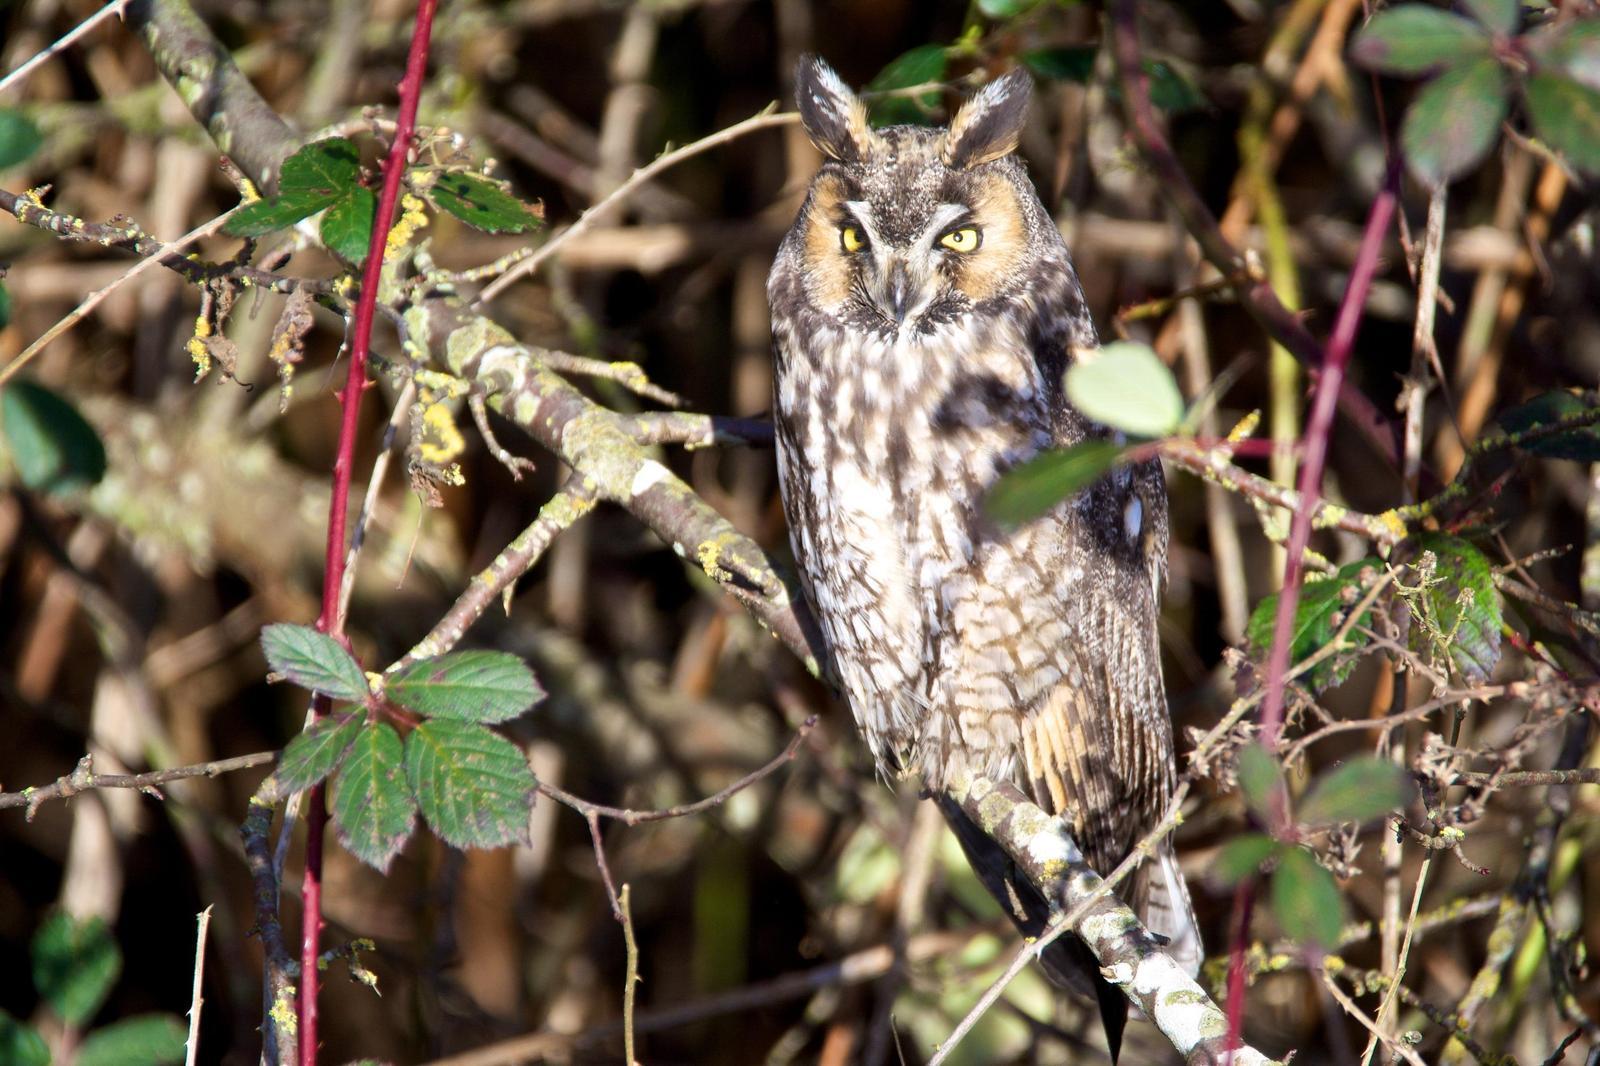 Long-eared Owl Photo by Brian Avent